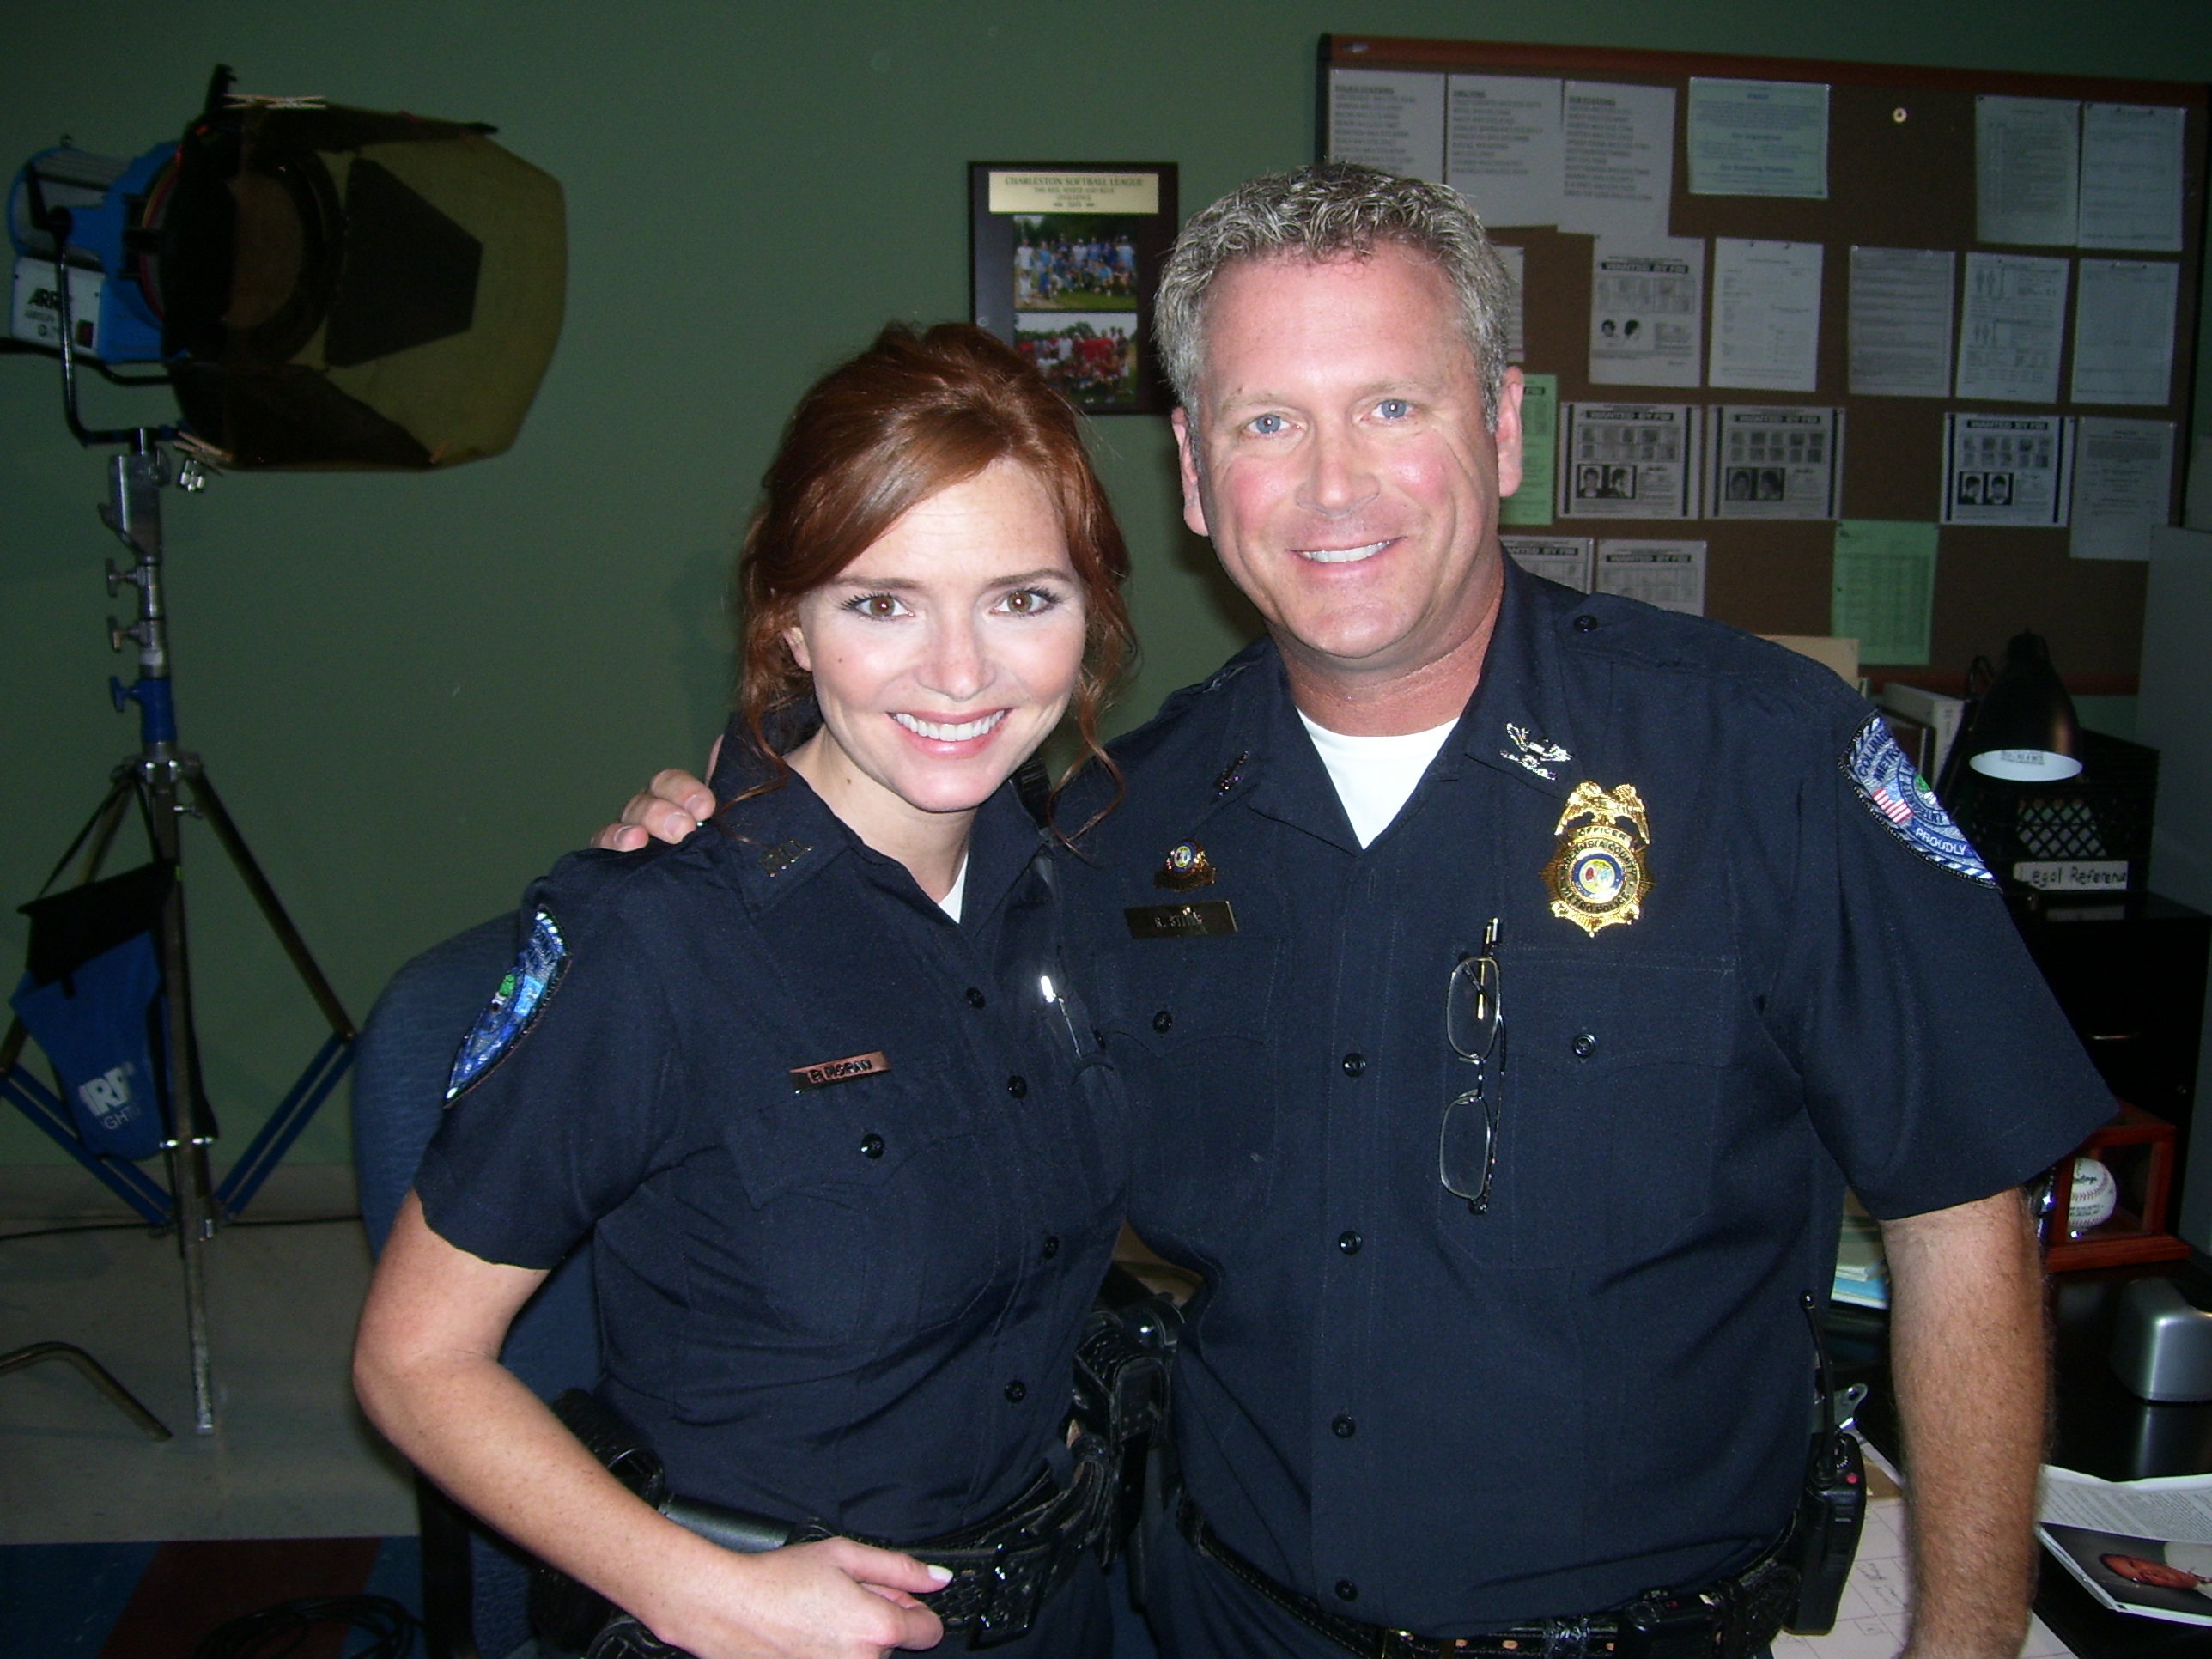 Tony Senzamici as Police Chief Stites with Brigid Brannagh as Officer Pamela Moran on the set of Army Wives. Episode 513, Farewell to Arms.